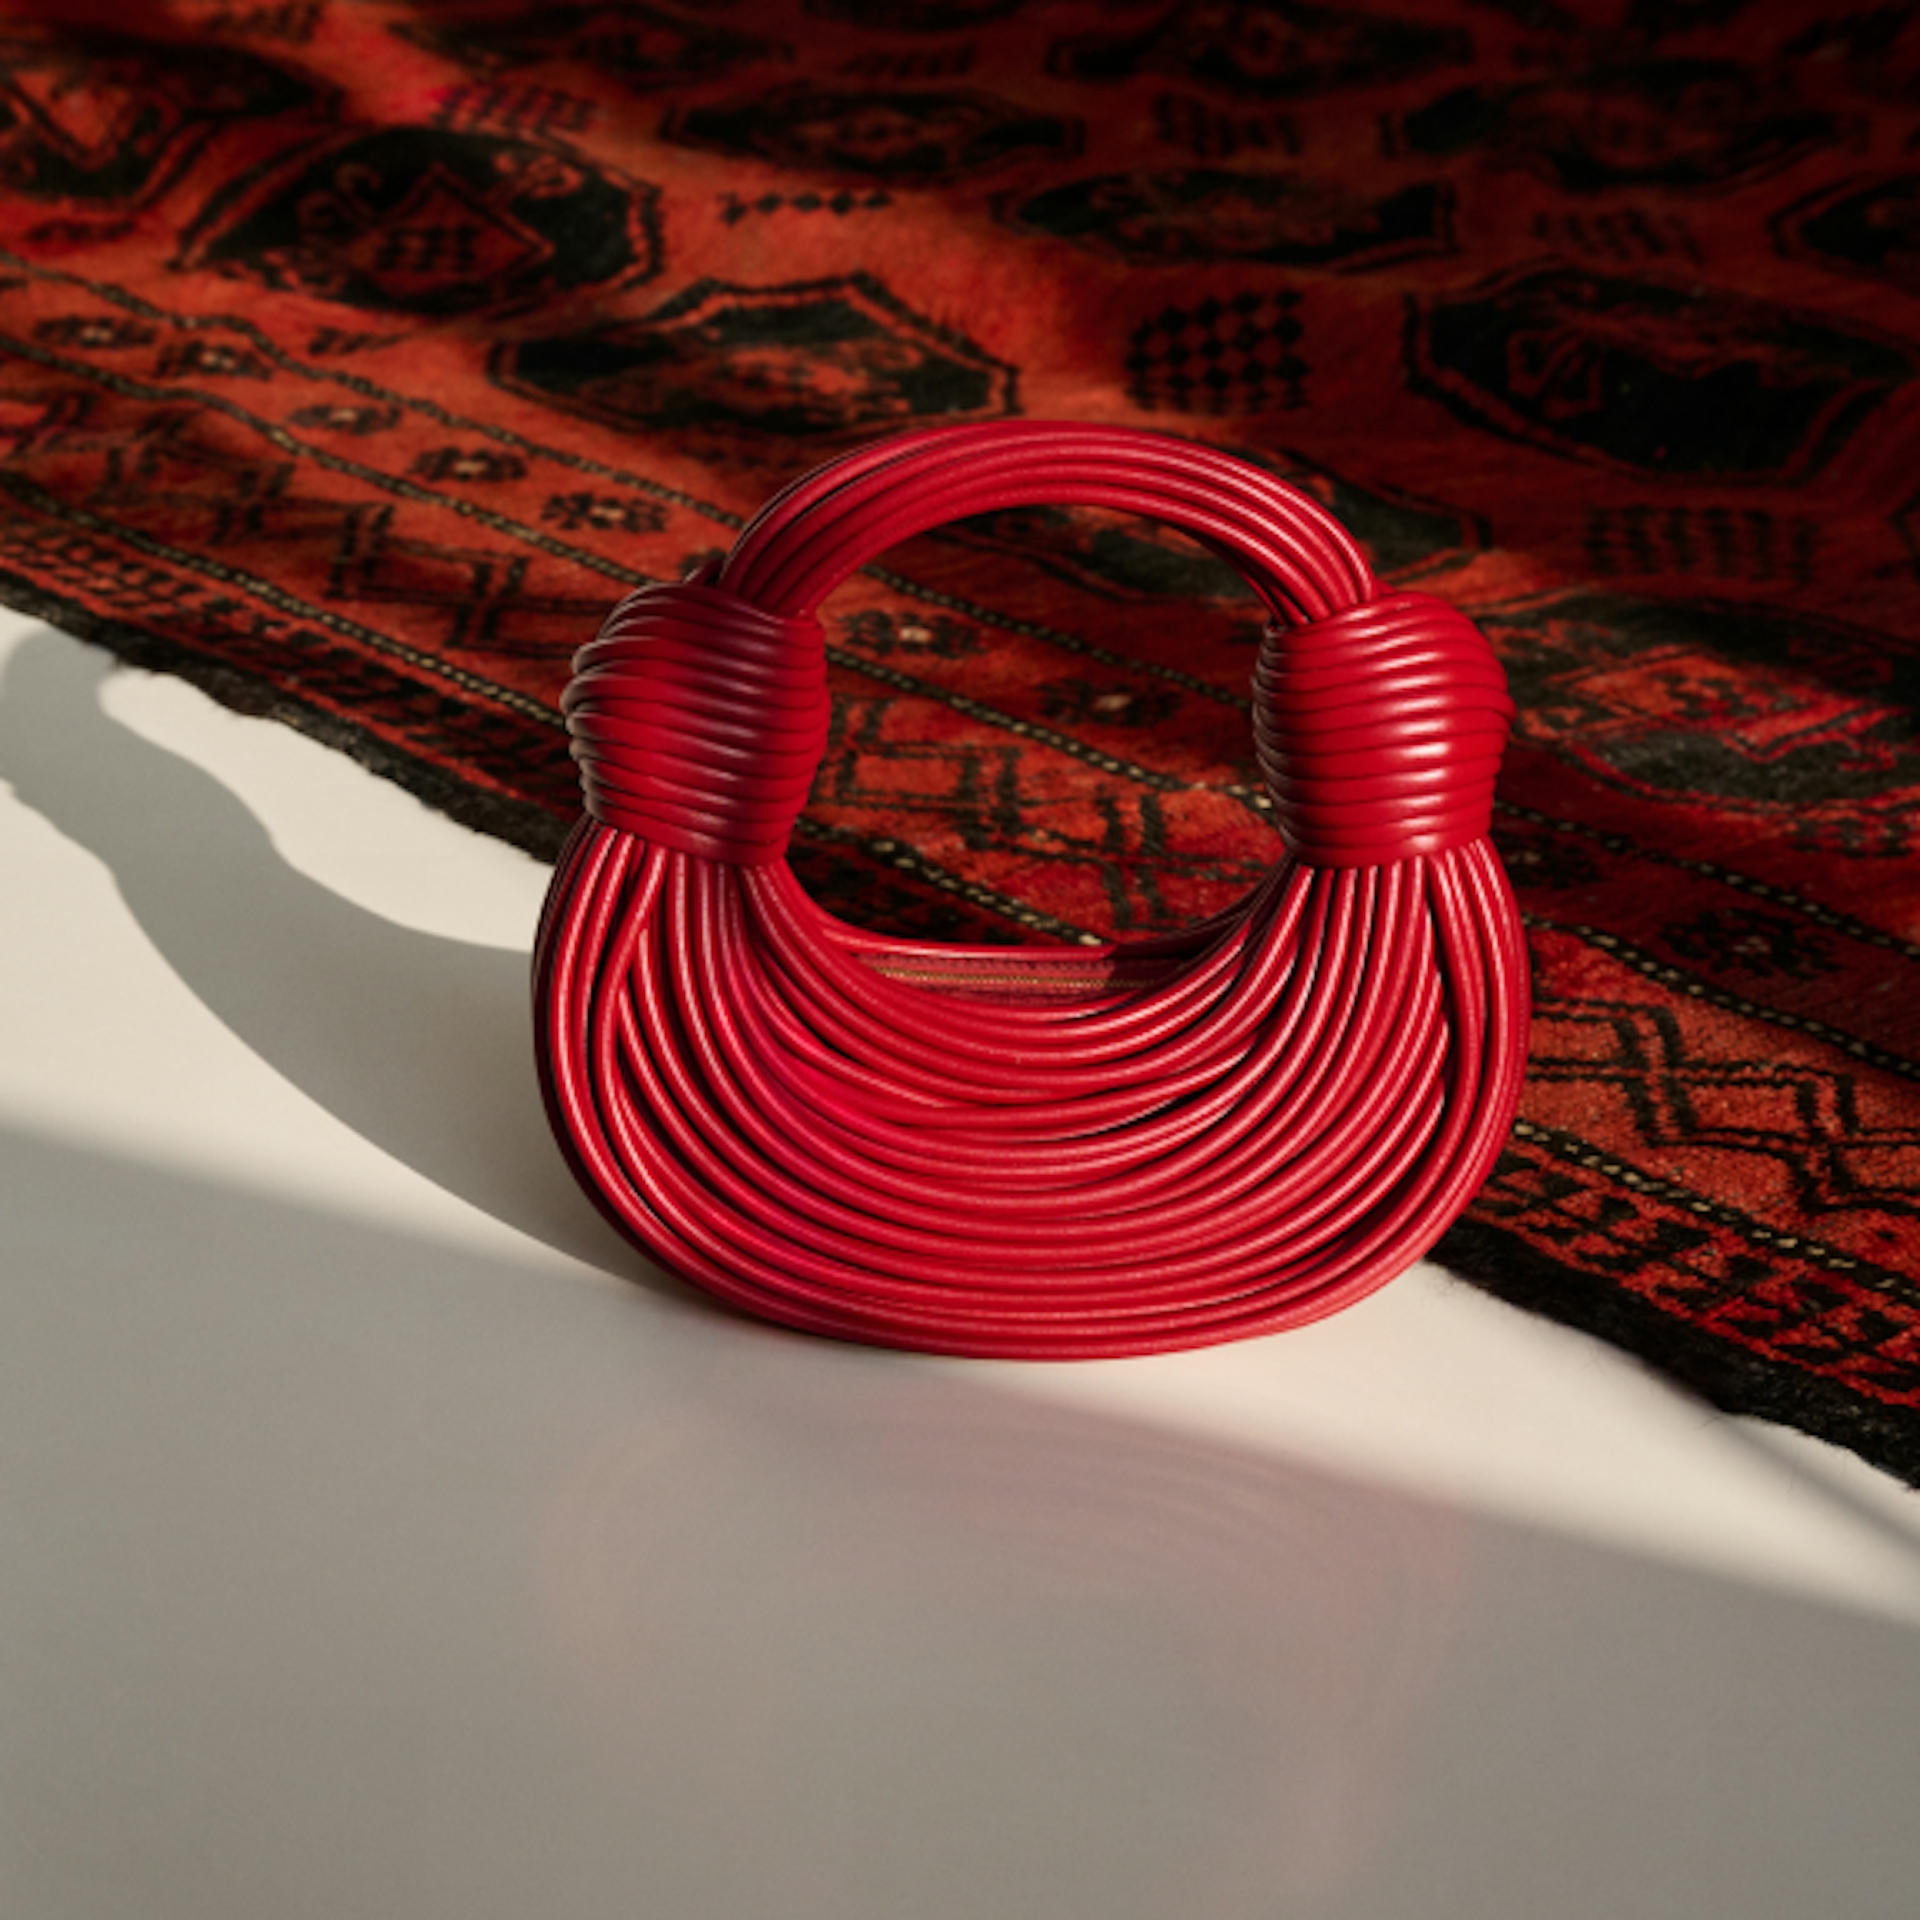 The image shows a stylish, small red handbag with a unique, coiled design. It is placed on a surface with a richly patterned red and black rug in the background, highlighting the bag's intricate texture and bold color.